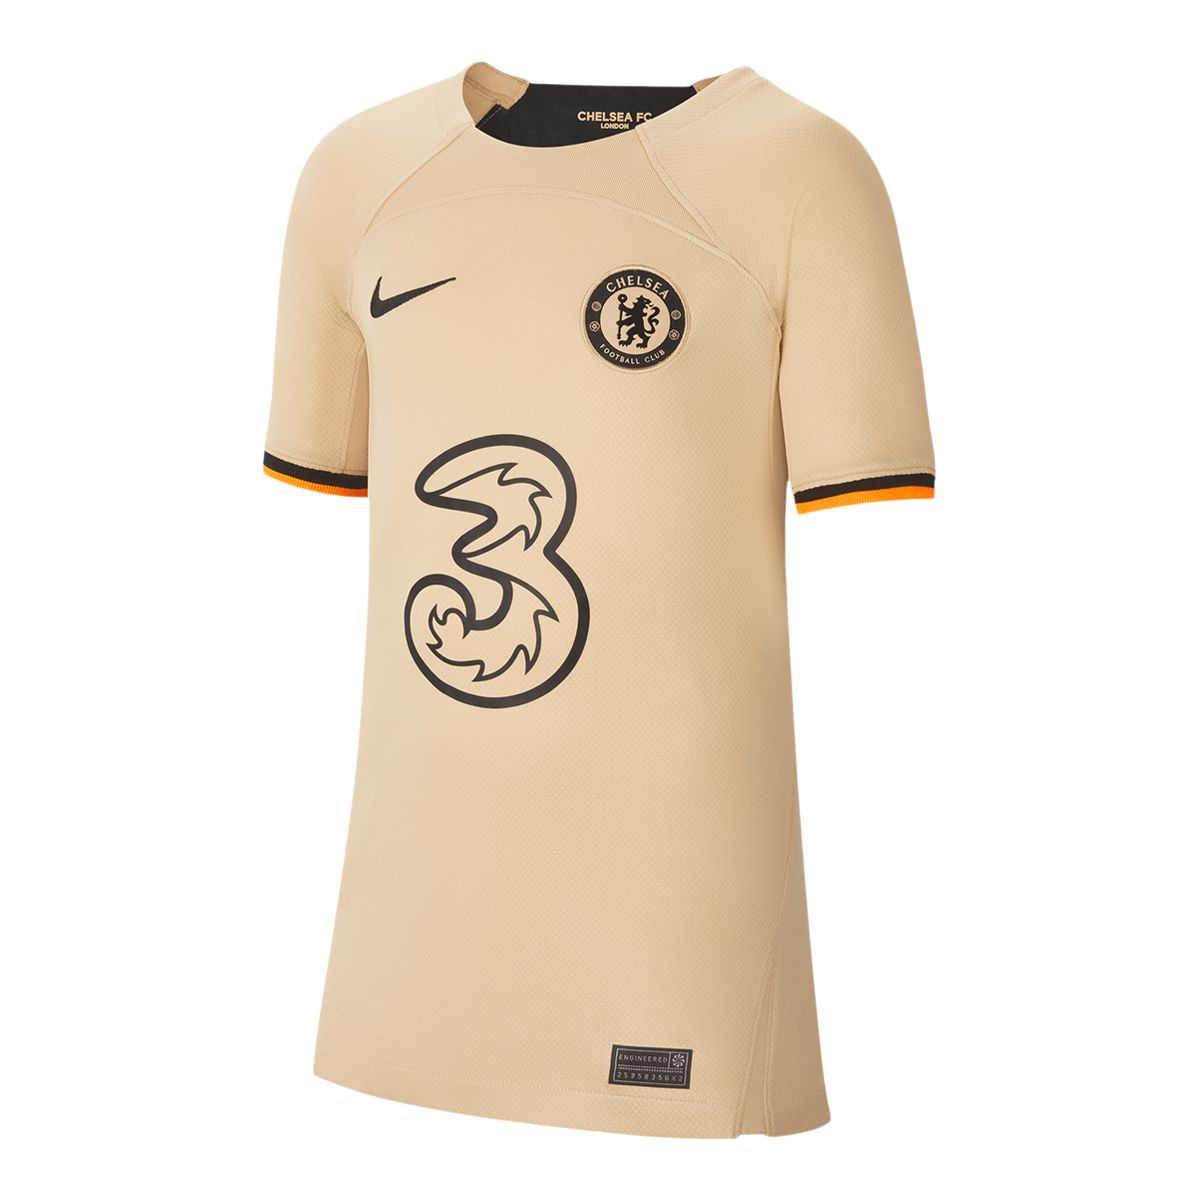 Image of Chelsea Nike Youth Replica Soccer Jersey Football EPL